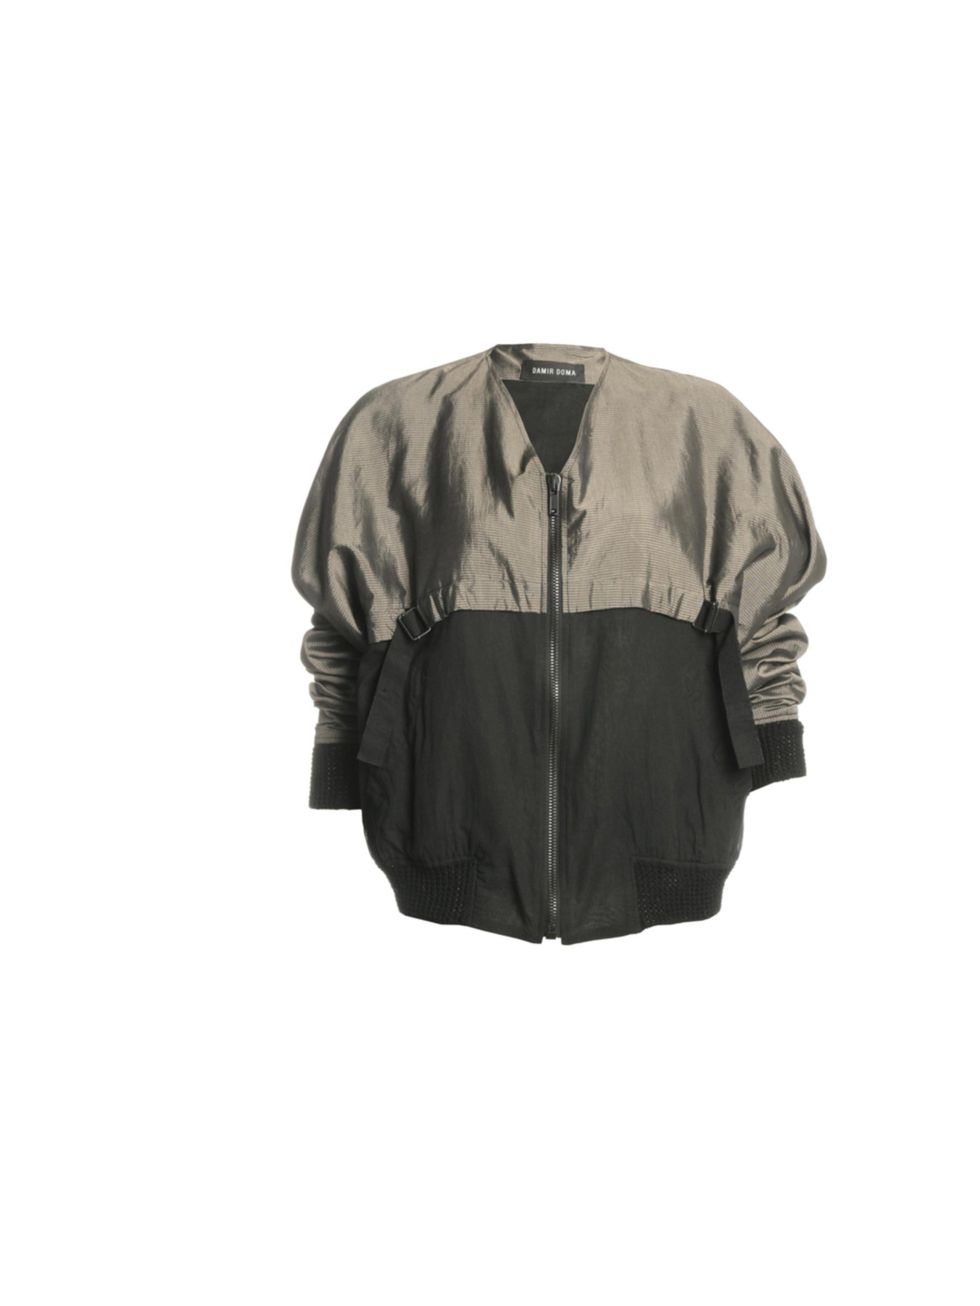 <p>Damir Doma silk bomber jacket, £752, at LN-CC</p><p><a href="http://shopping.elleuk.com/browse?fts=damir+doma+bomber+jacket">BUY NOW</a></p>